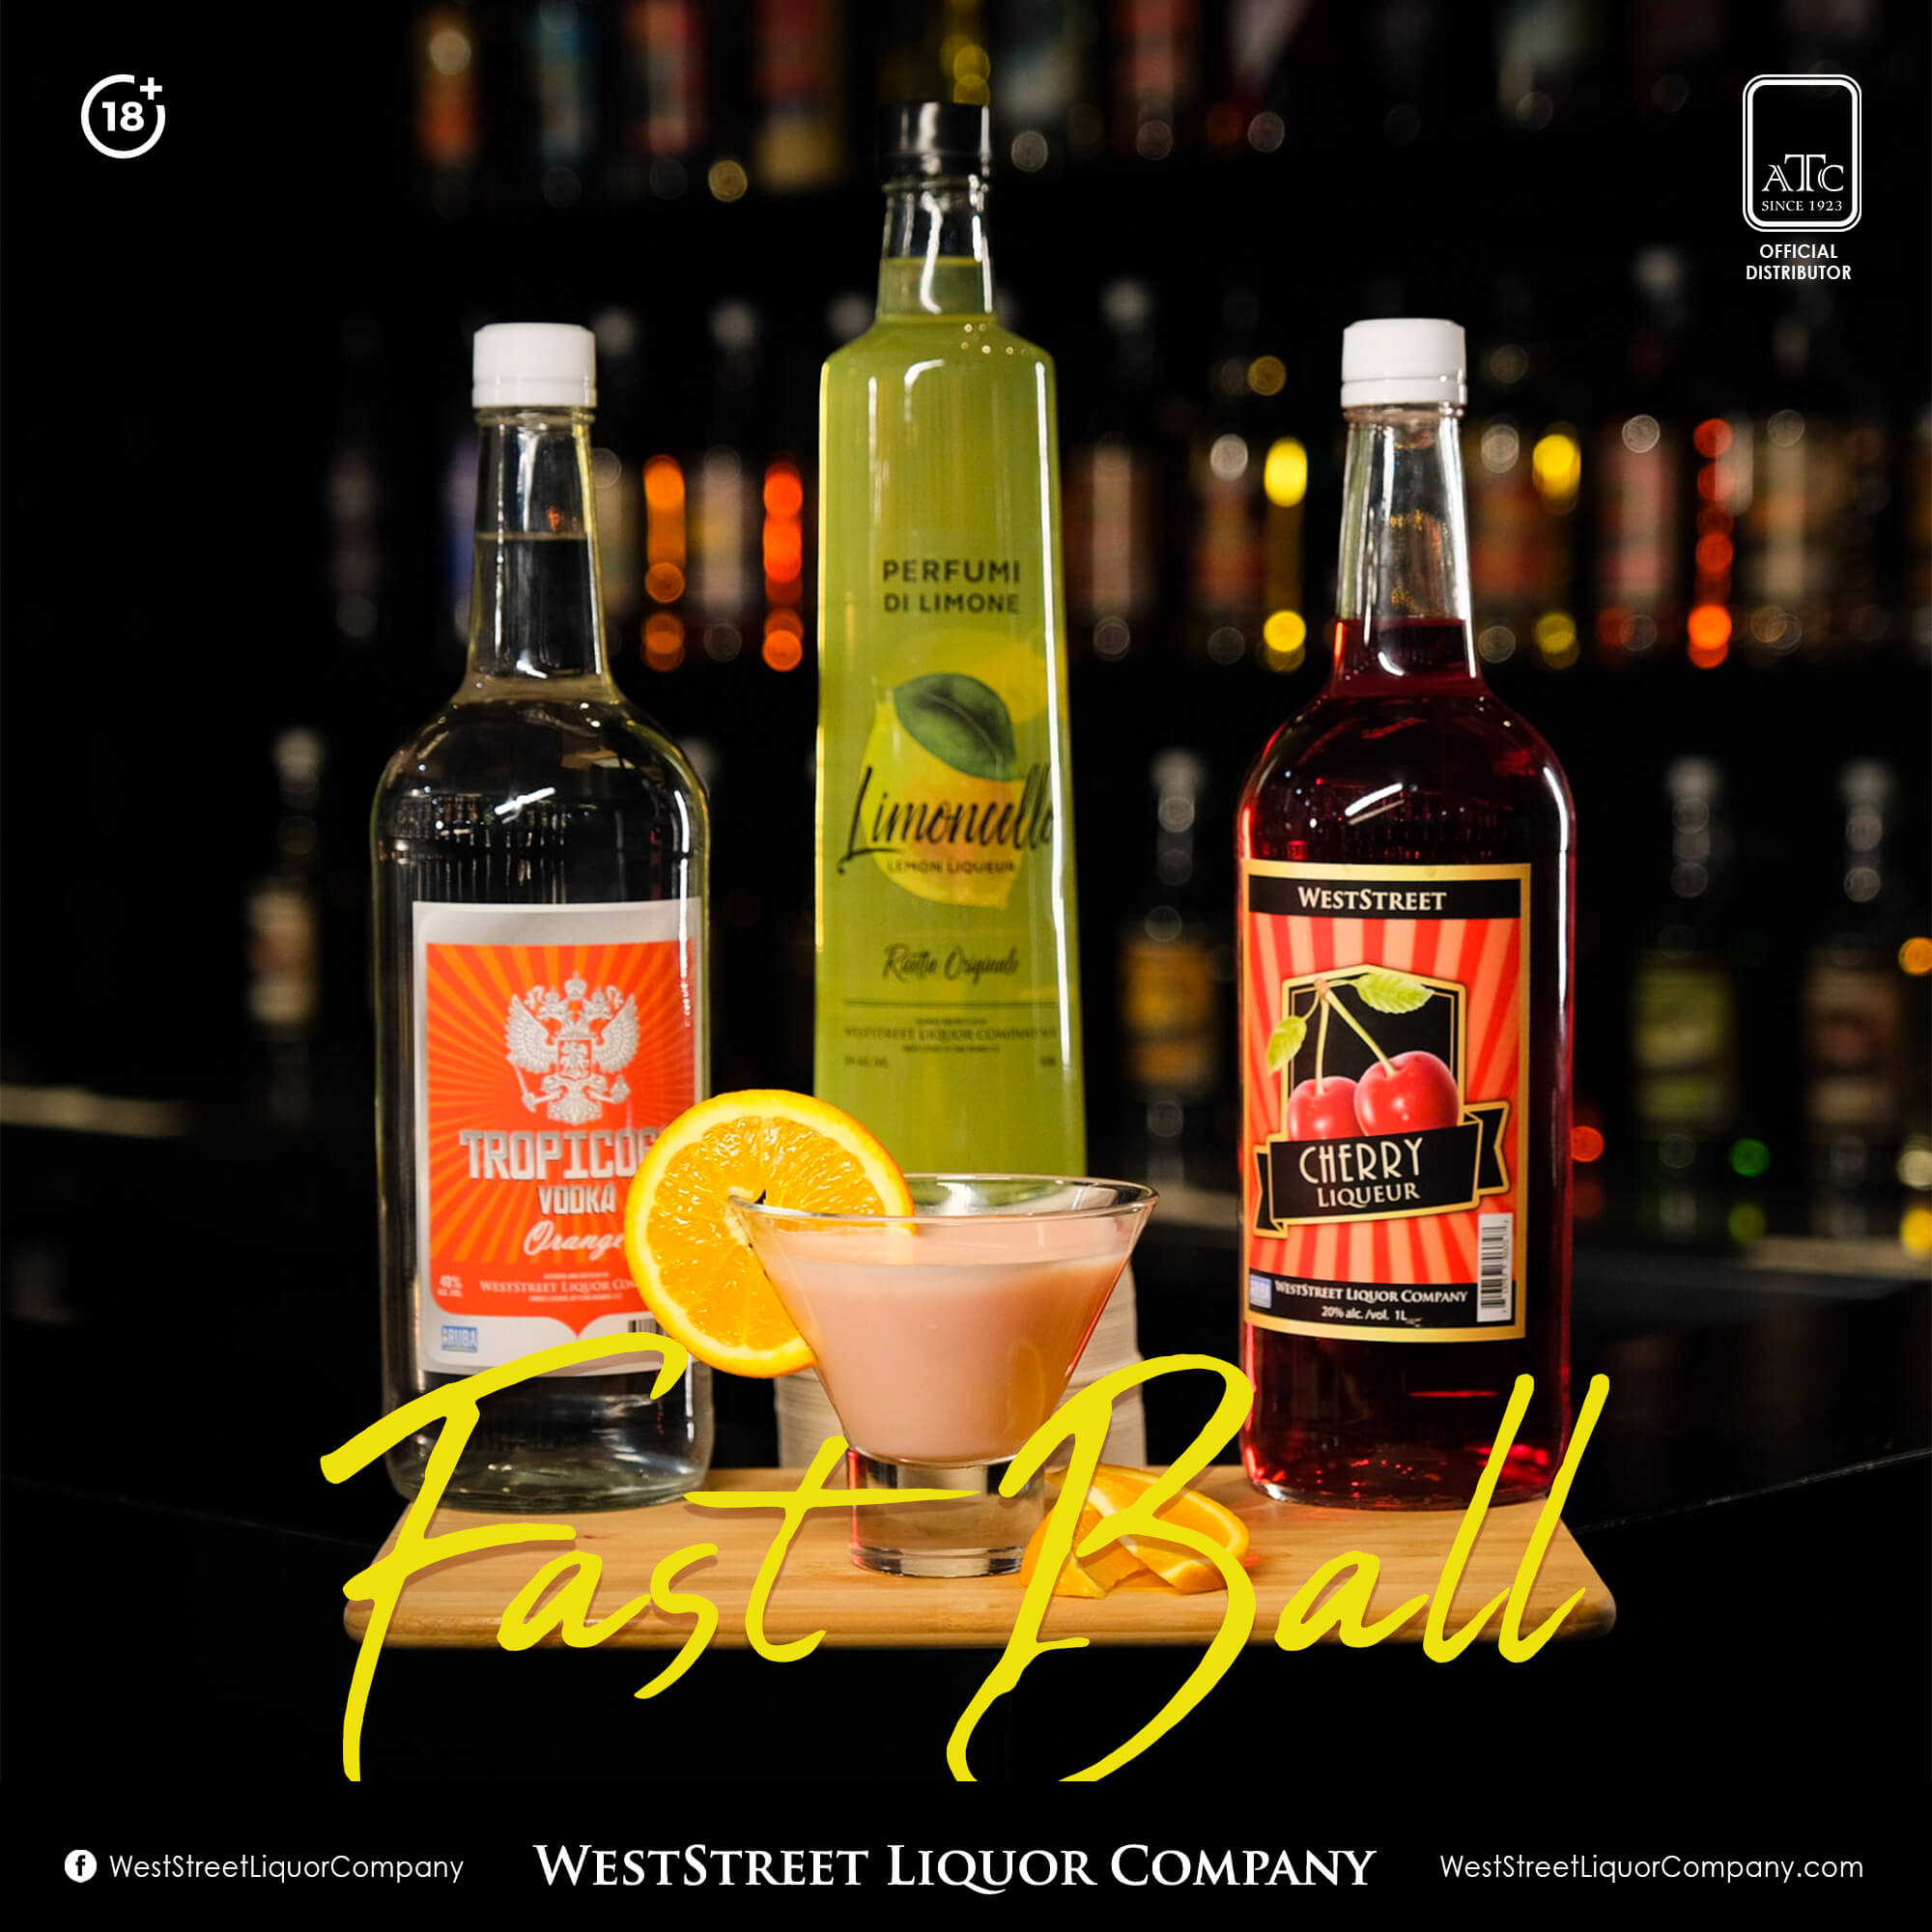 https://www.weststreetliquorcompany.com/wp-content/uploads/2020/09/CocktailPackages-Name-FastBall-1.jpg